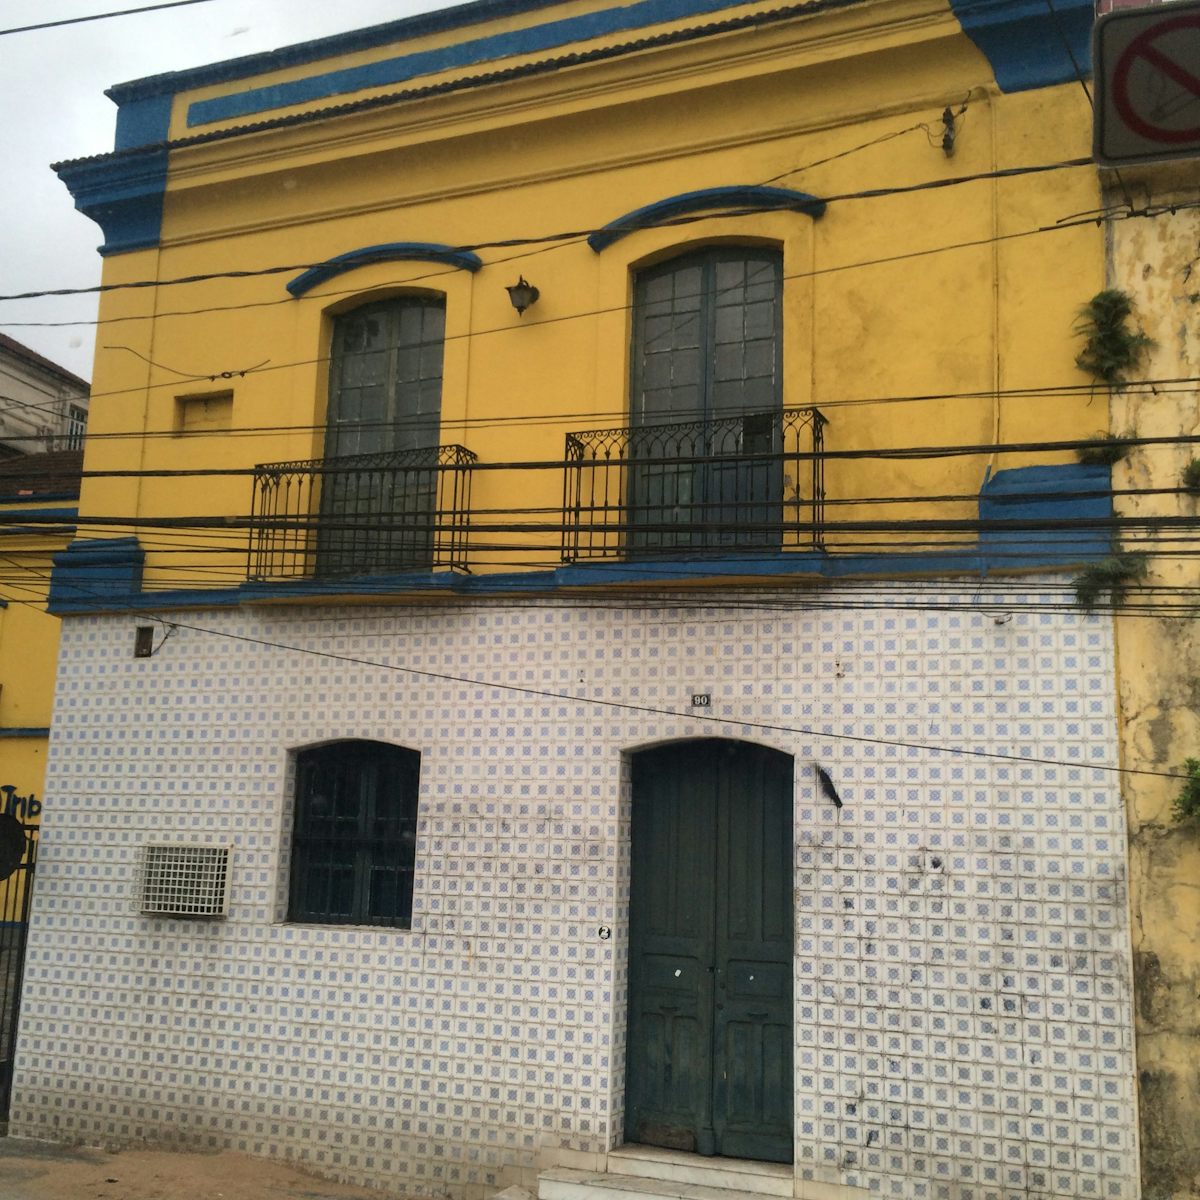 This was one of the nicest buildings we could find in this town of santos.